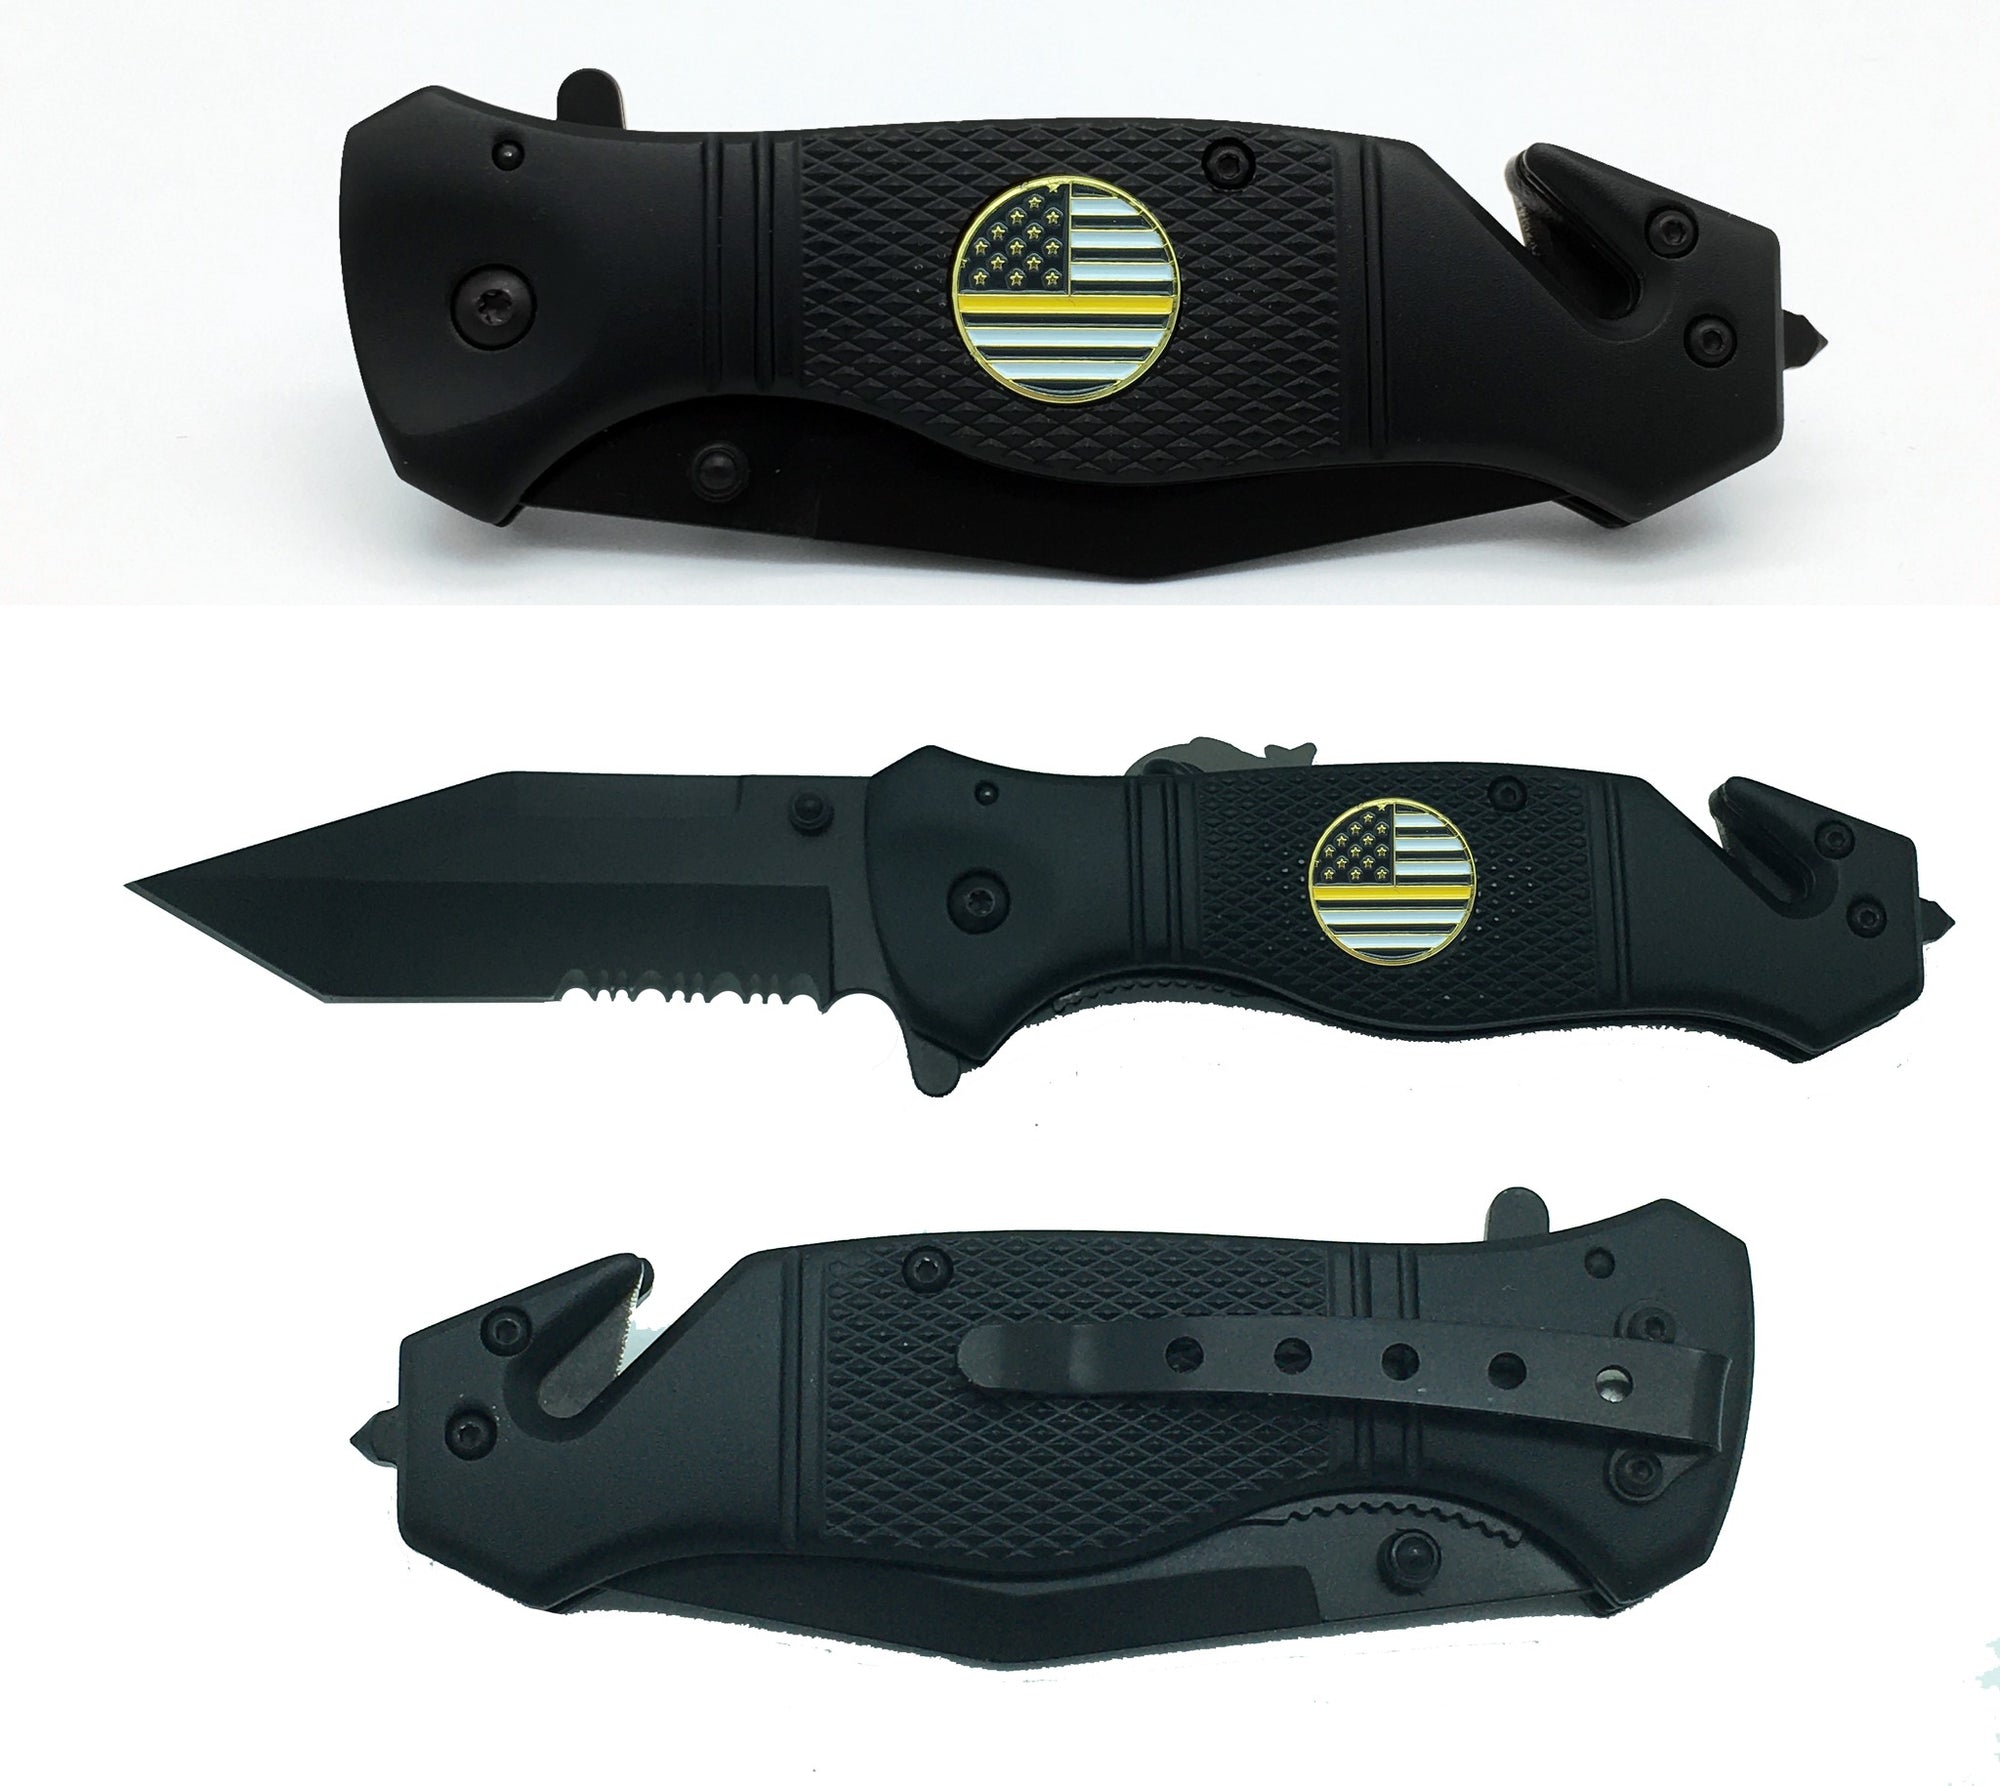 Thin Yellow Line collectible 3-in-1 Police Tactical Rescue Knife for with Seatbelt Cutter, Steel Serrated Blade, Glass Breaker 2-K